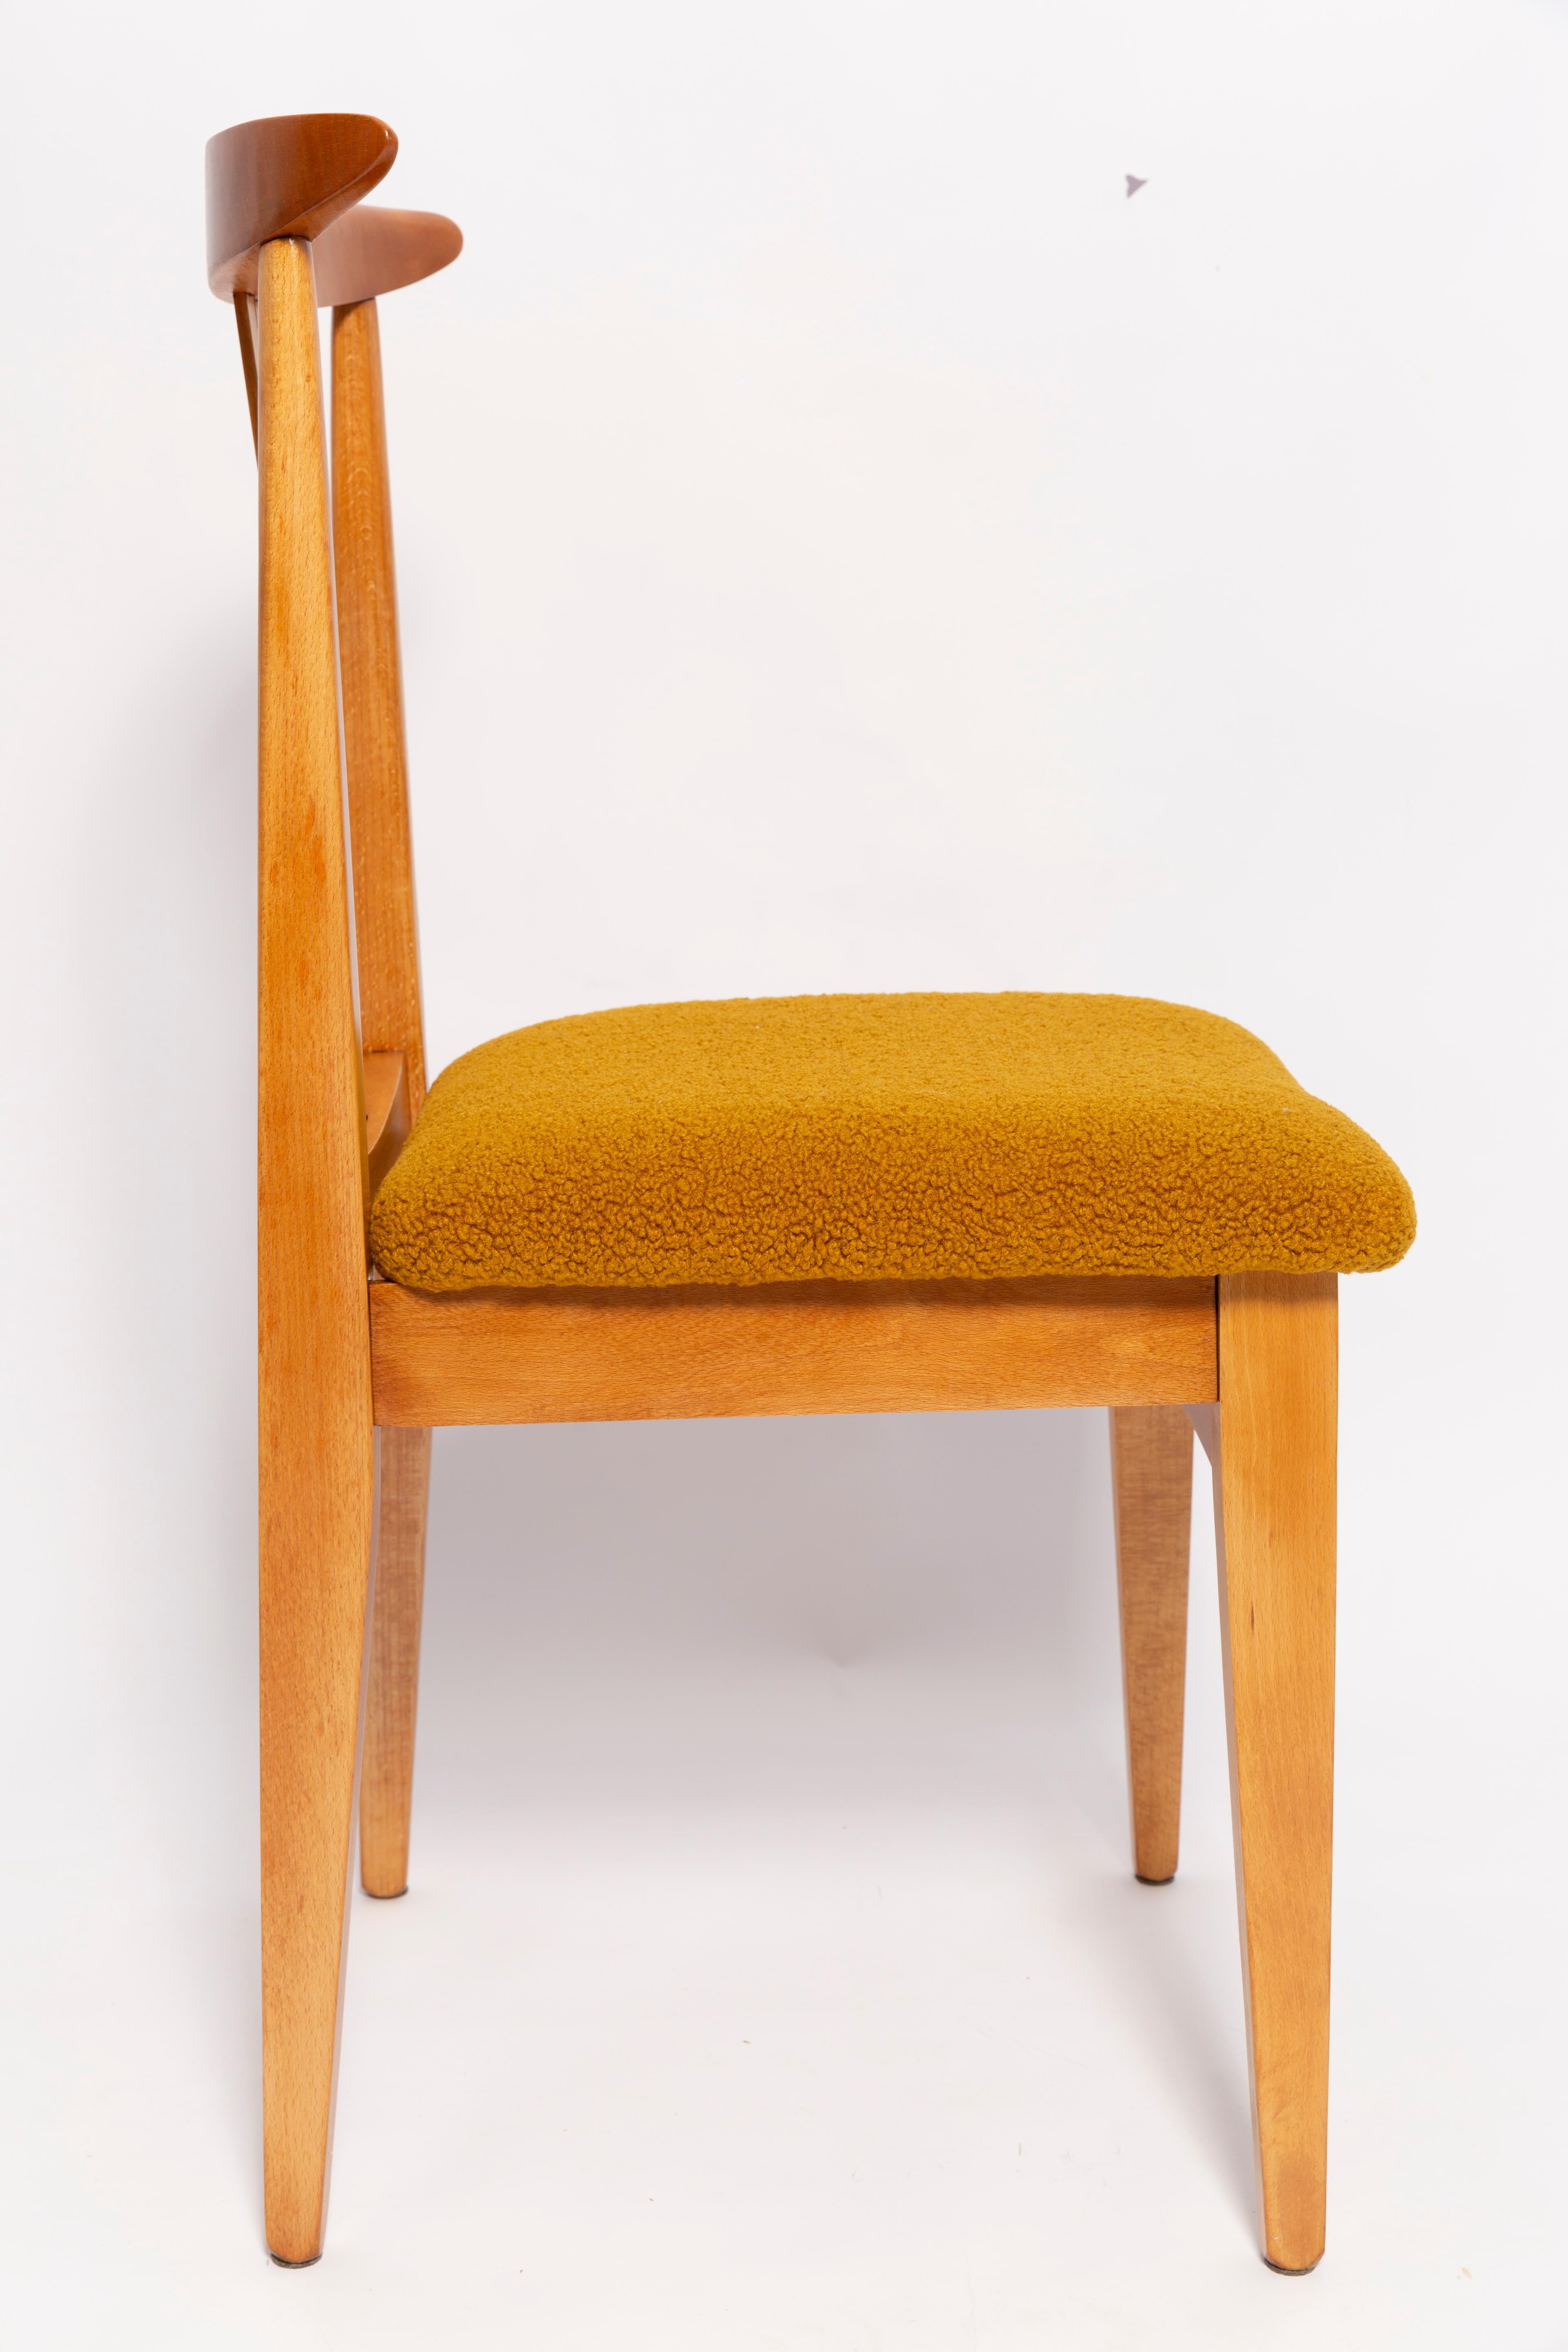 Hand-Crafted Eight Mid-Century Ochre Boucle Chairs, Light Wood, M. Zielinski, Europe, 1960s For Sale